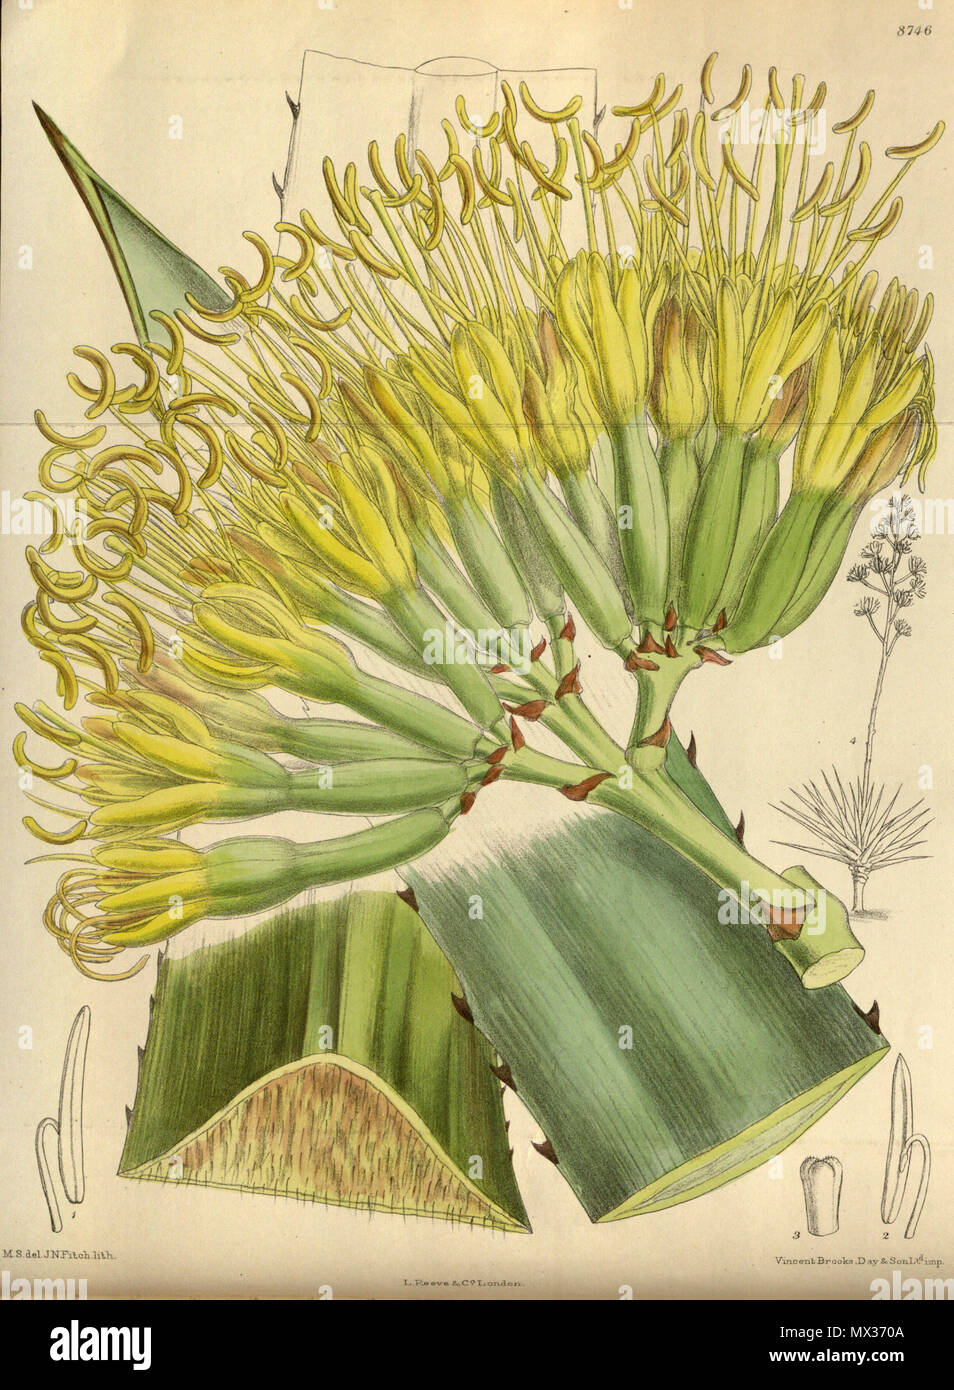 . Agave fourcroydes, Asparagaceae, Agavoideae . 1918. M.S. del., J.N.Fitch lith. 30 Agave fourcroydes 144-8746 Stock Photo